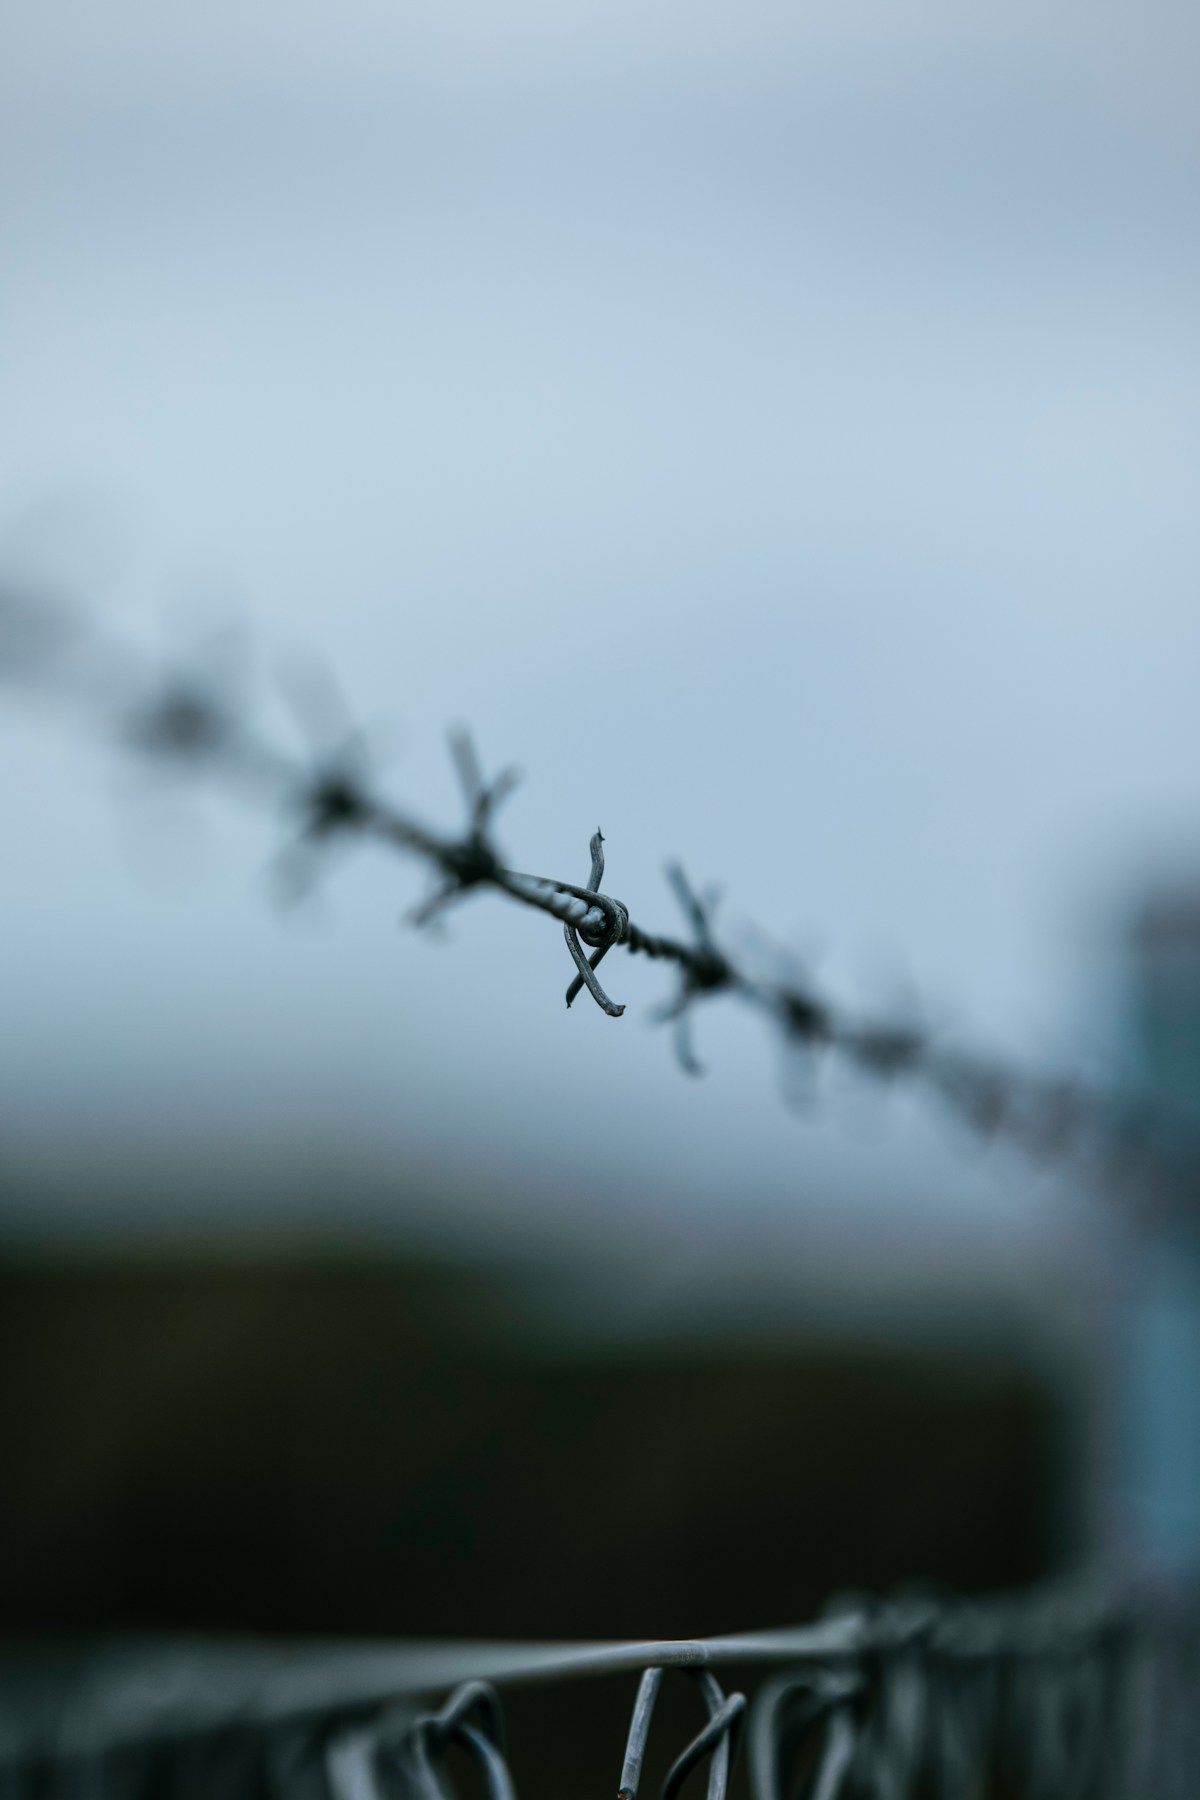 Blurry barbed wire fence against a blue background